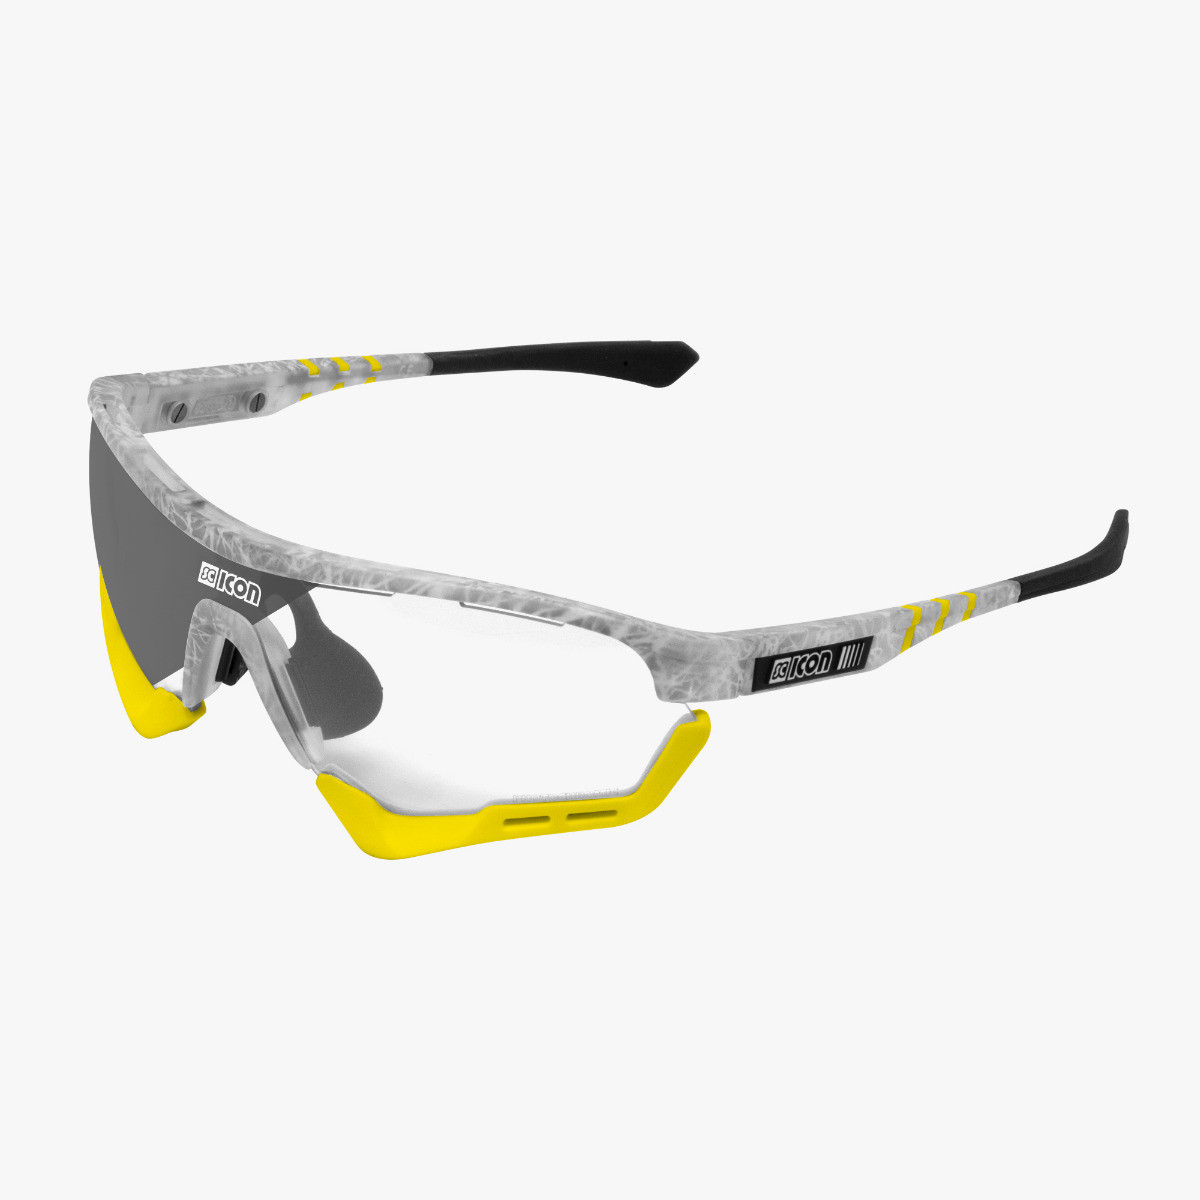 Scicon Sports | Aerotech Sport Cycling Performance Sunglasses - Frozen White / Photocromatic Silver - EY13180505